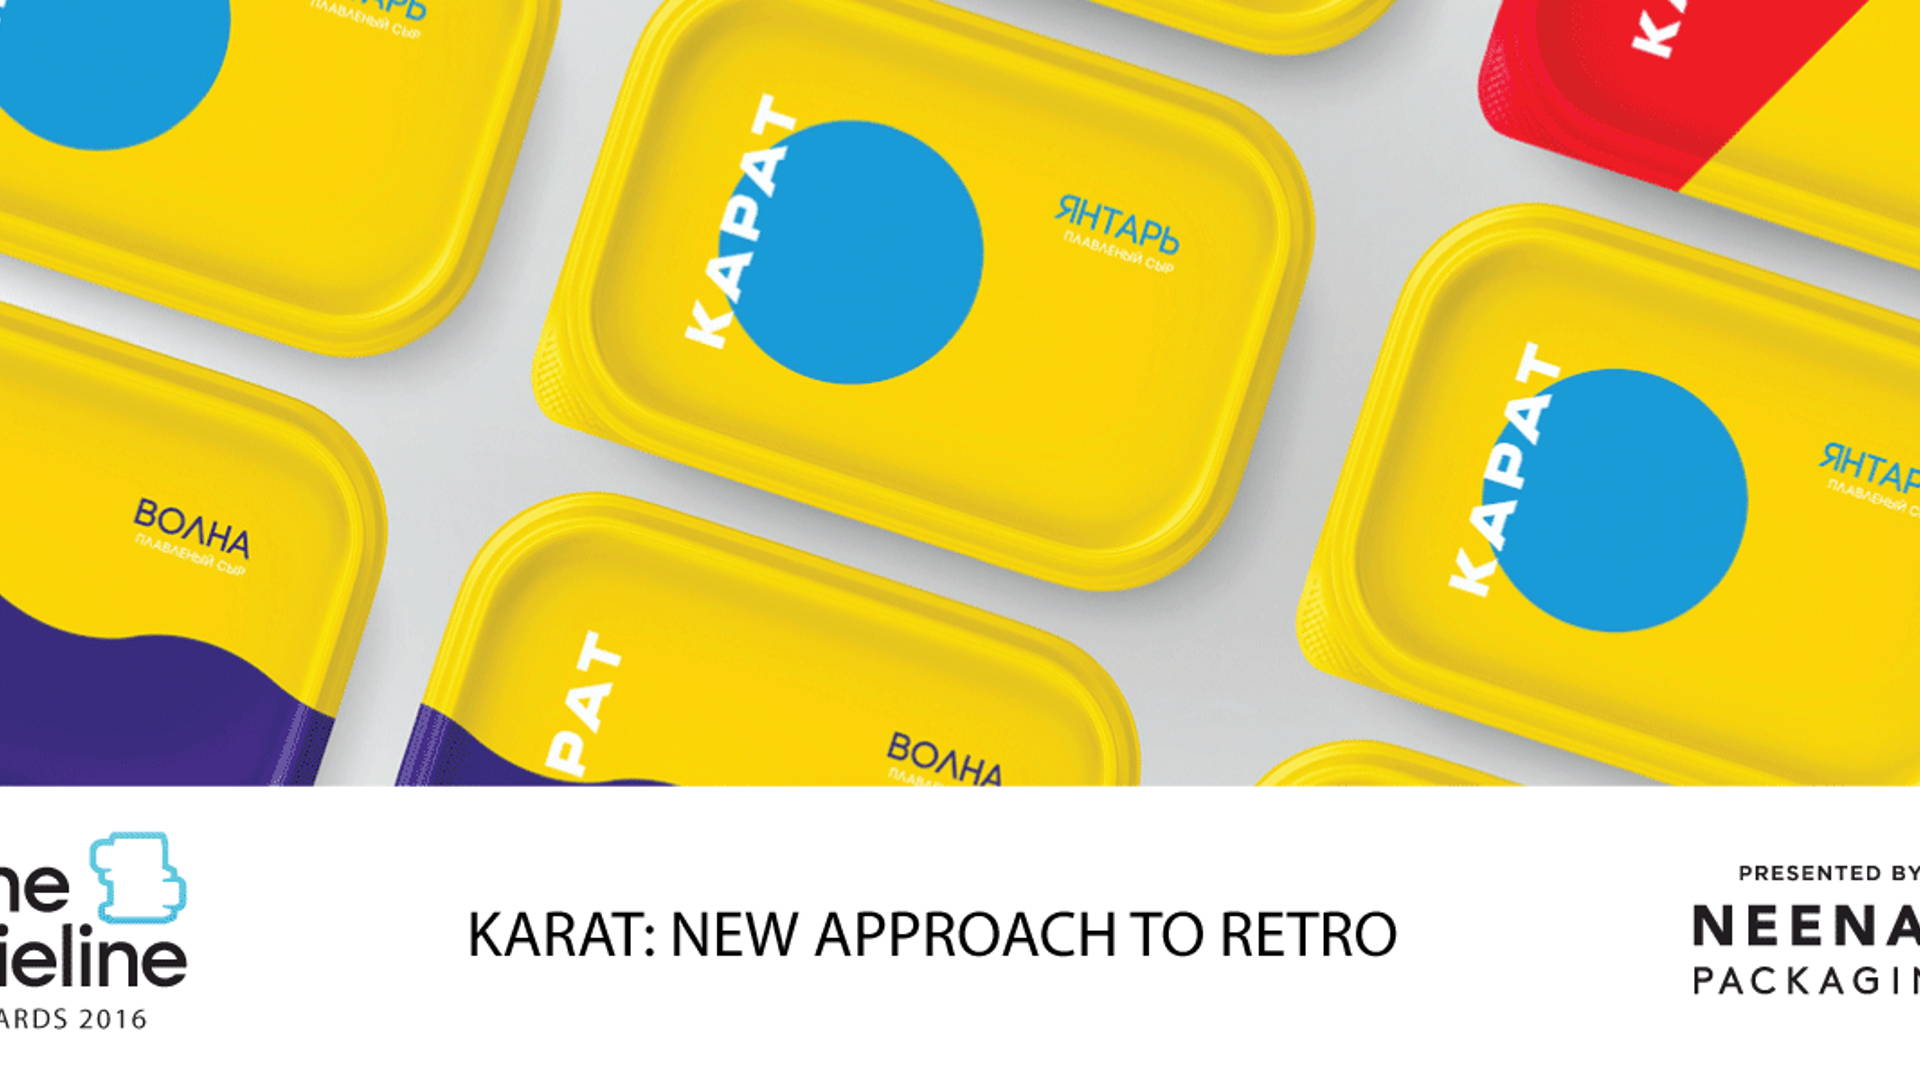 Featured image for The Dieline Awards 2016 Outstanding Achievements: KARAT: NEW APPROACH TO RETRO